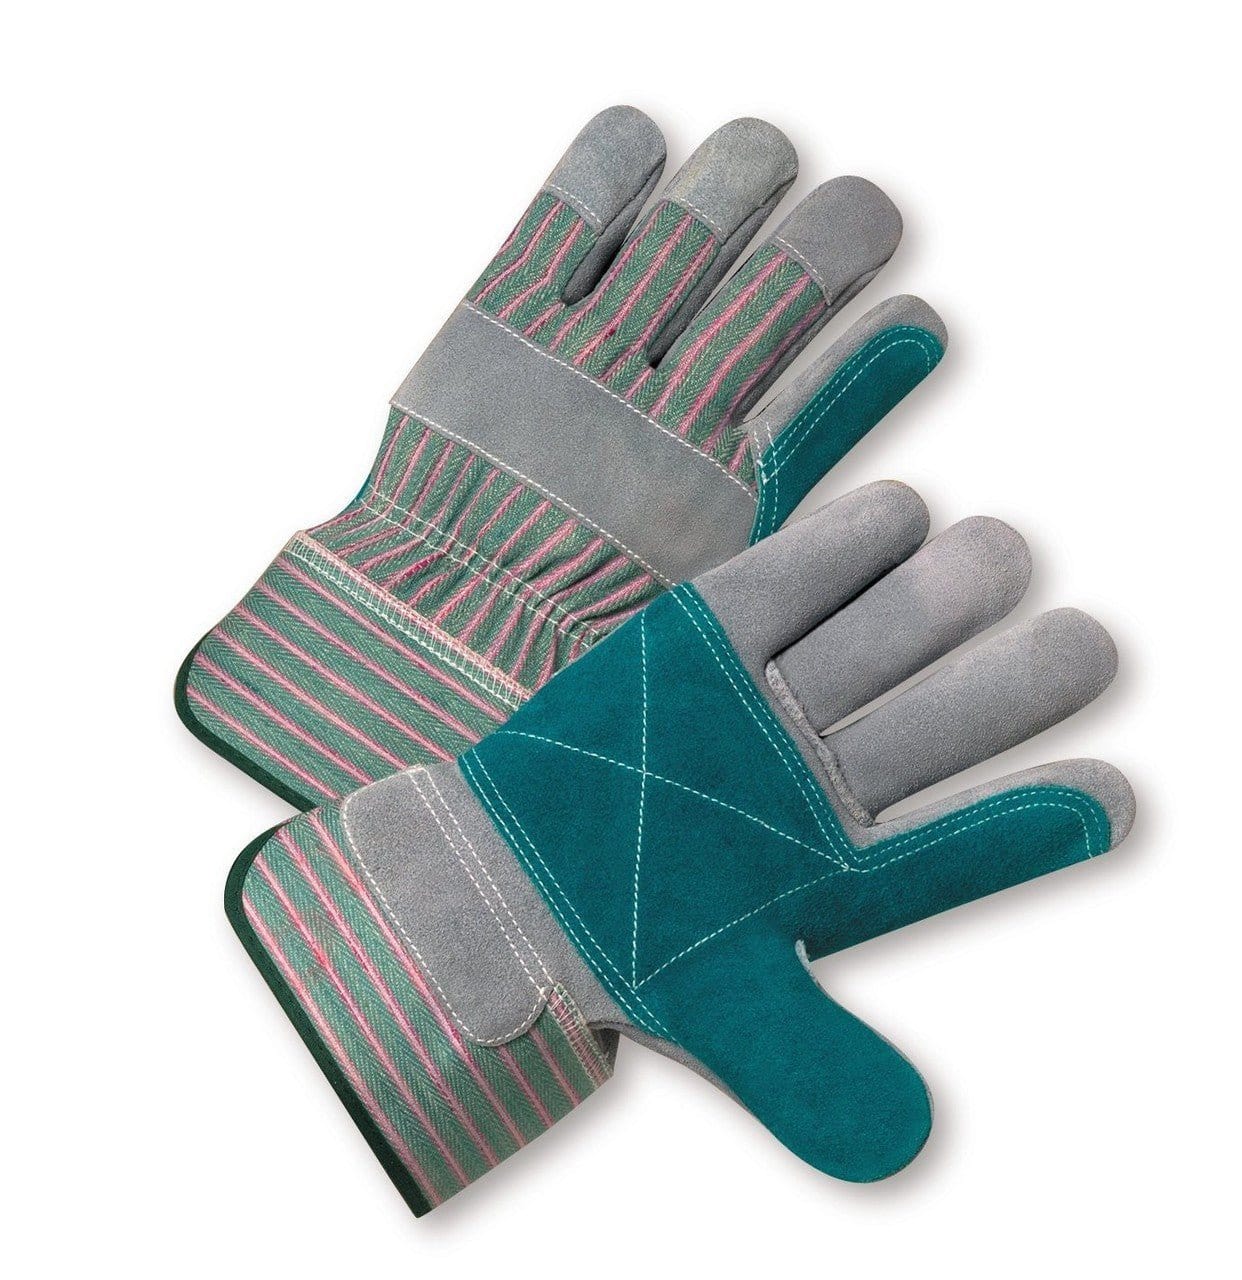 Leather Double Palm Glove Size Large - 419 Carbide